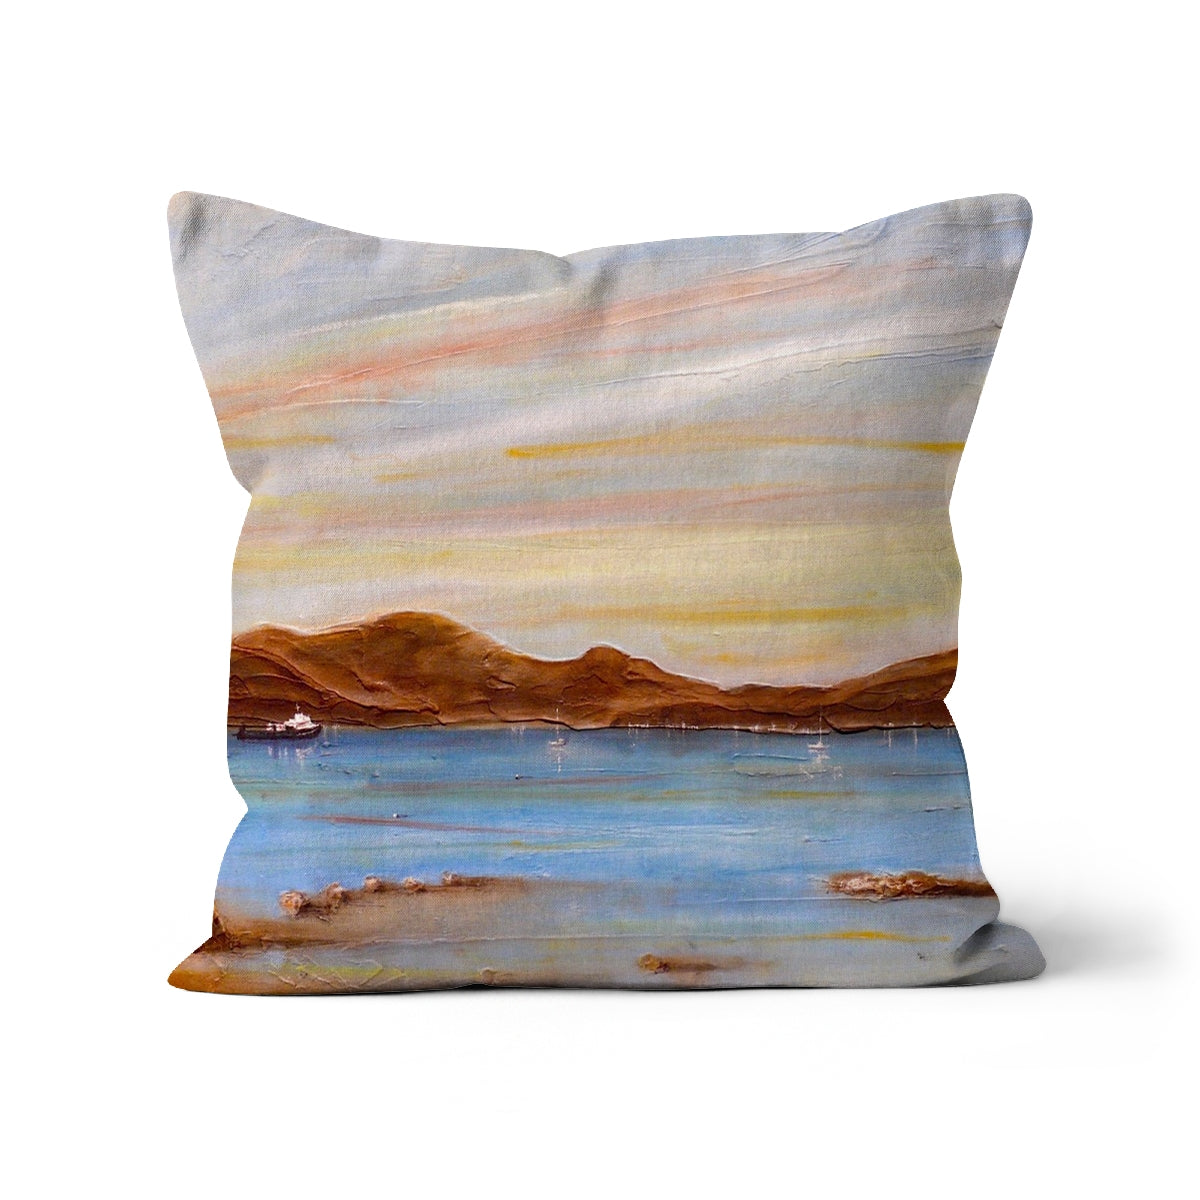 The Last Ferry To Dunoon Art Gifts Cushion-Cushions-River Clyde Art Gallery-Linen-16"x16"-Paintings, Prints, Homeware, Art Gifts From Scotland By Scottish Artist Kevin Hunter